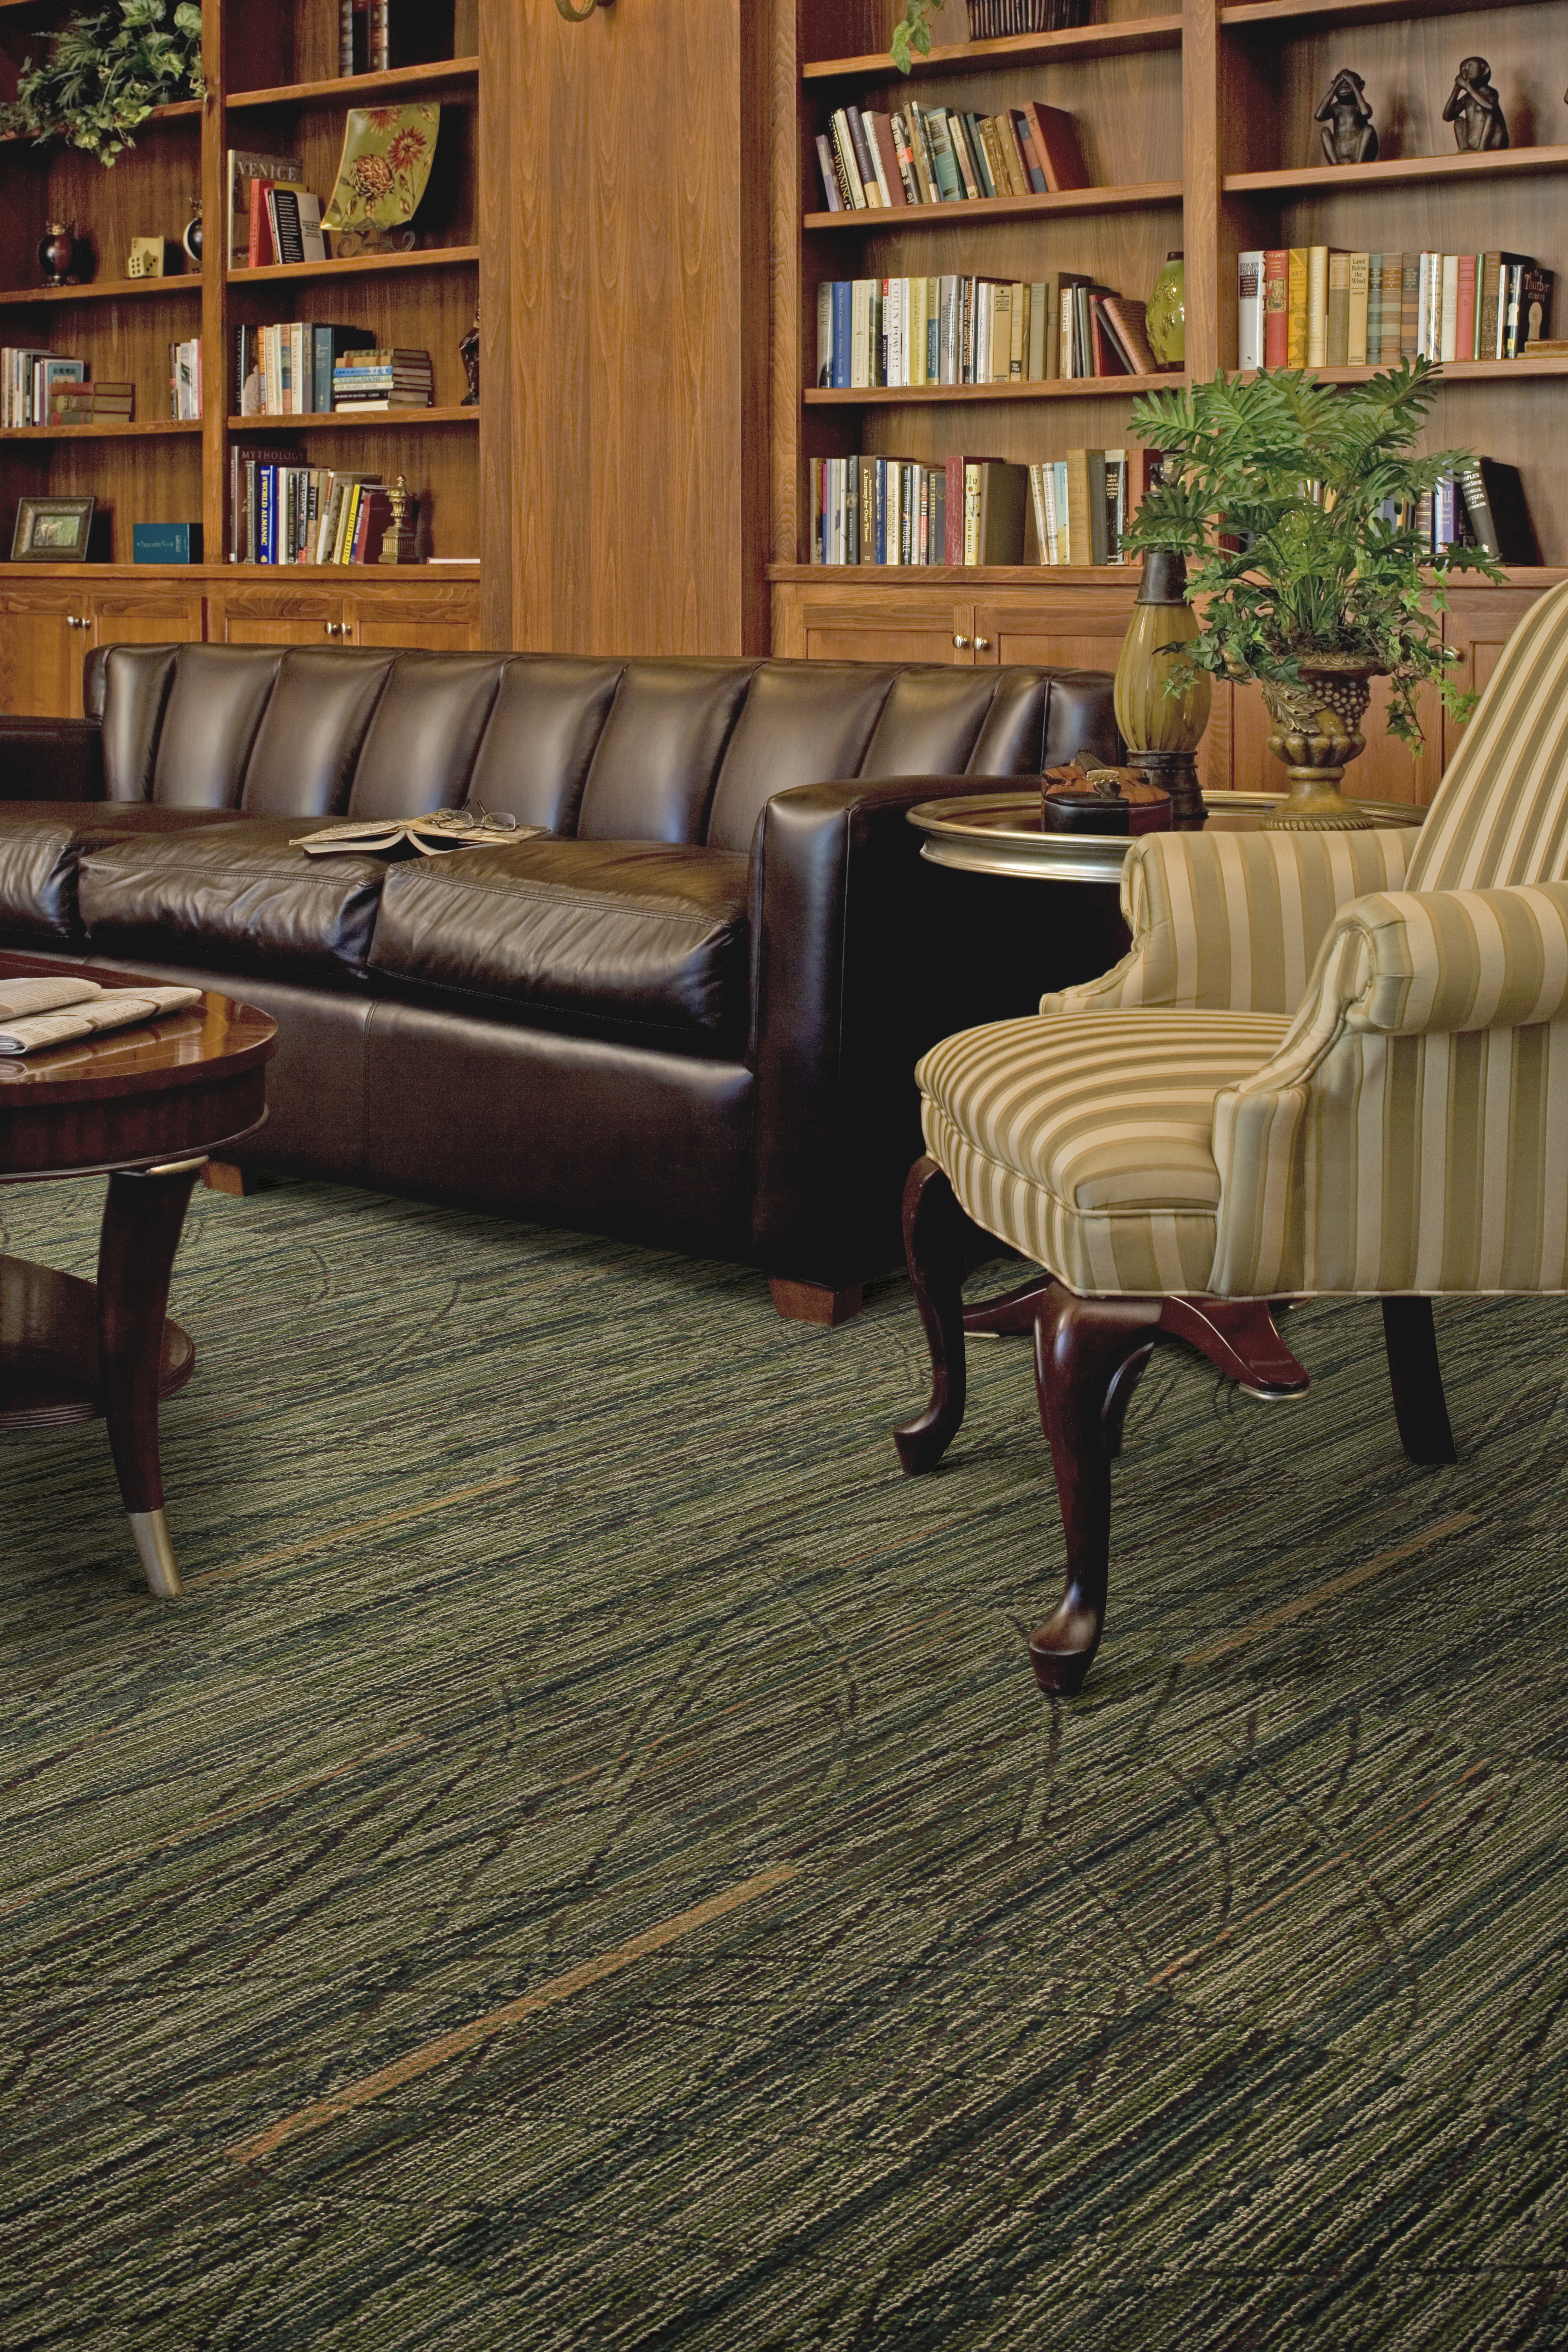 Interface Prairie Grass carpet tile in senior housing seating area with leather sofa and bookshelves